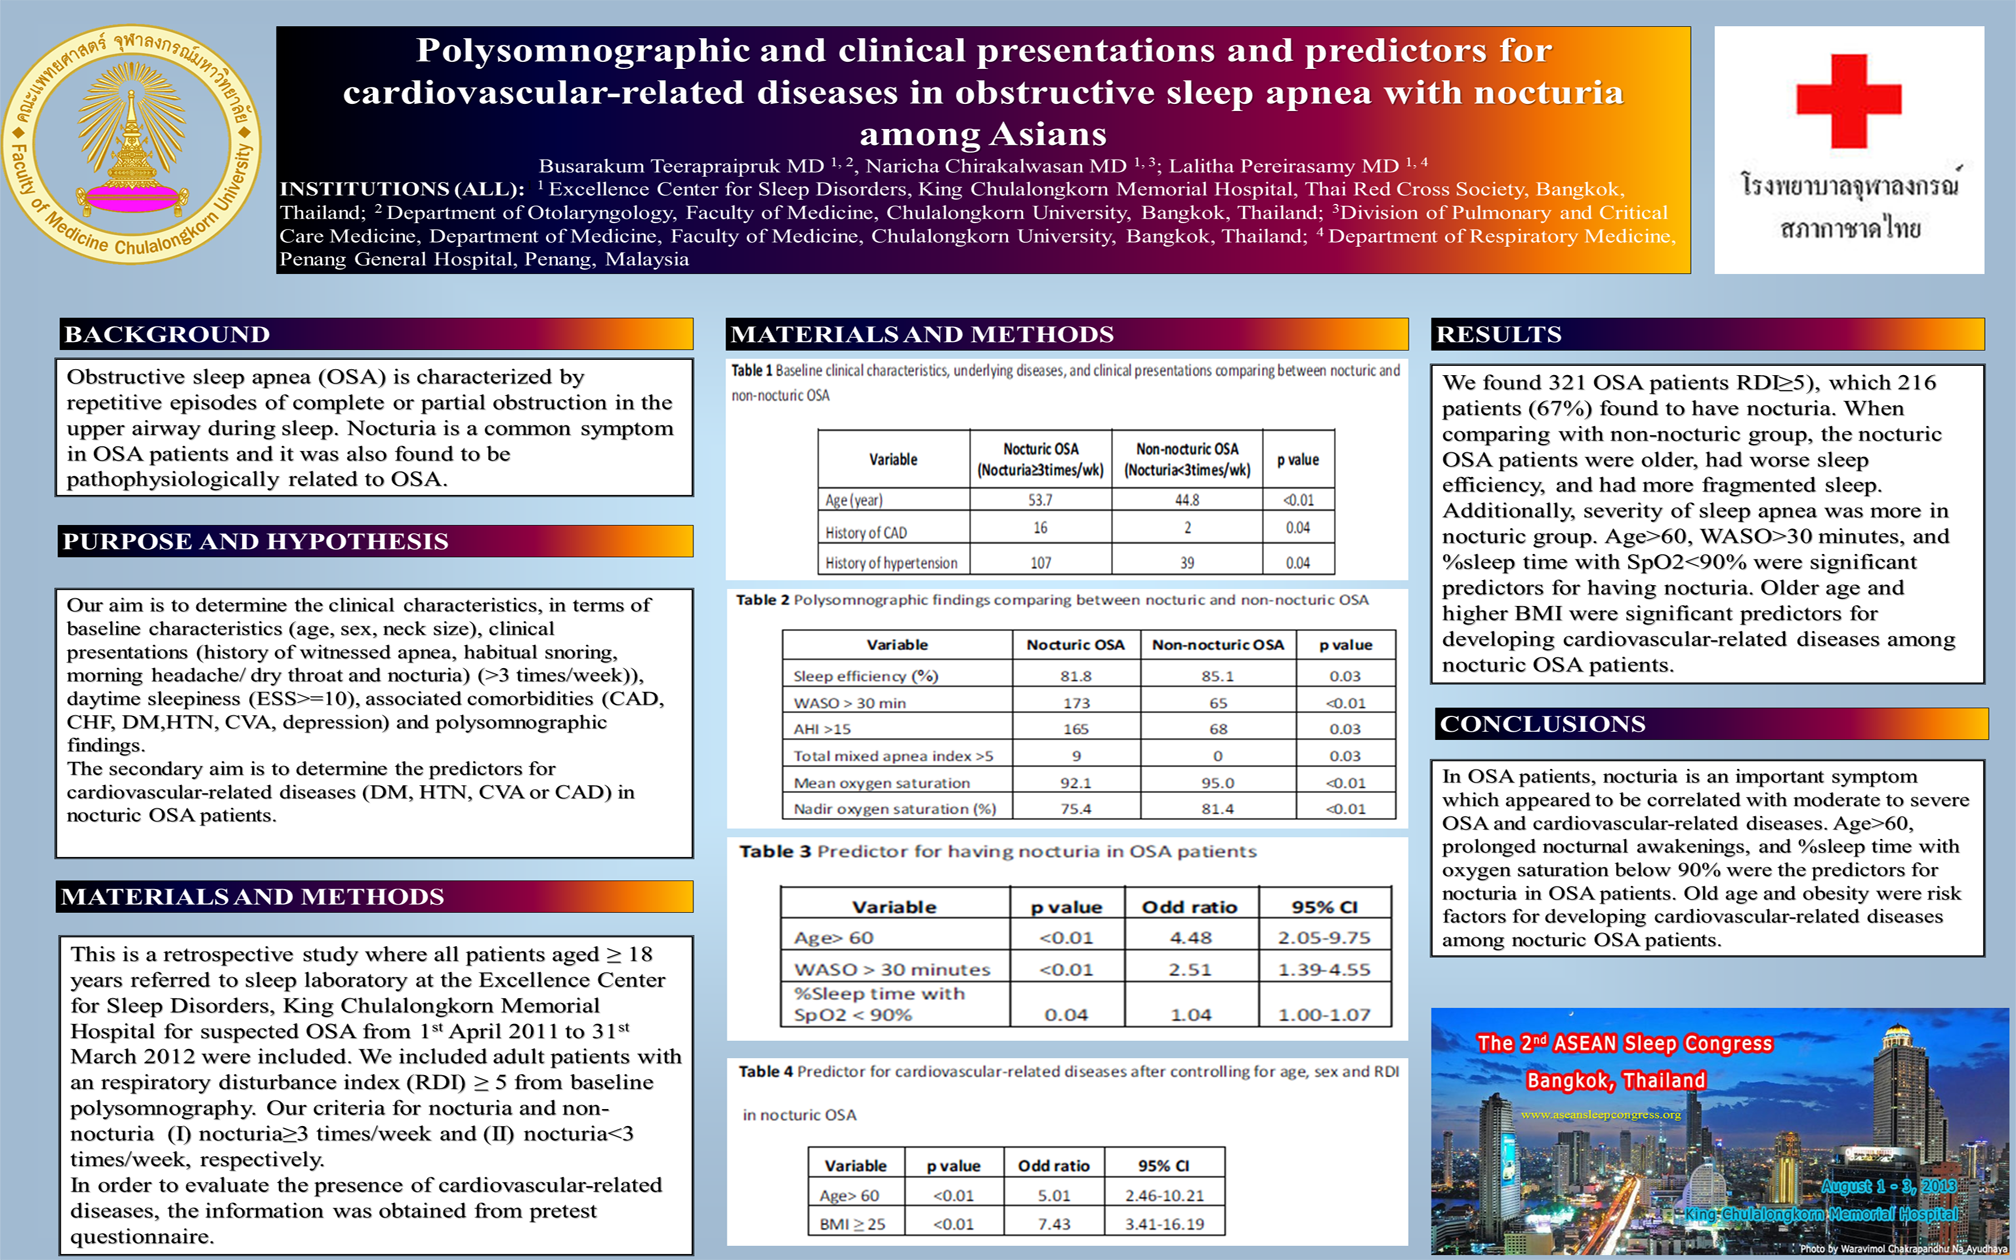 POLYSOMNOGRAPHIC AND CLINICAL PRESENTATIONS AND PREDICTORS FOR CARDIOVASCULAR-RELATED DISEASES IN OBSTRUCTIVE SLEEP APNEA WITH NOCTURIA AMONG ASIANS